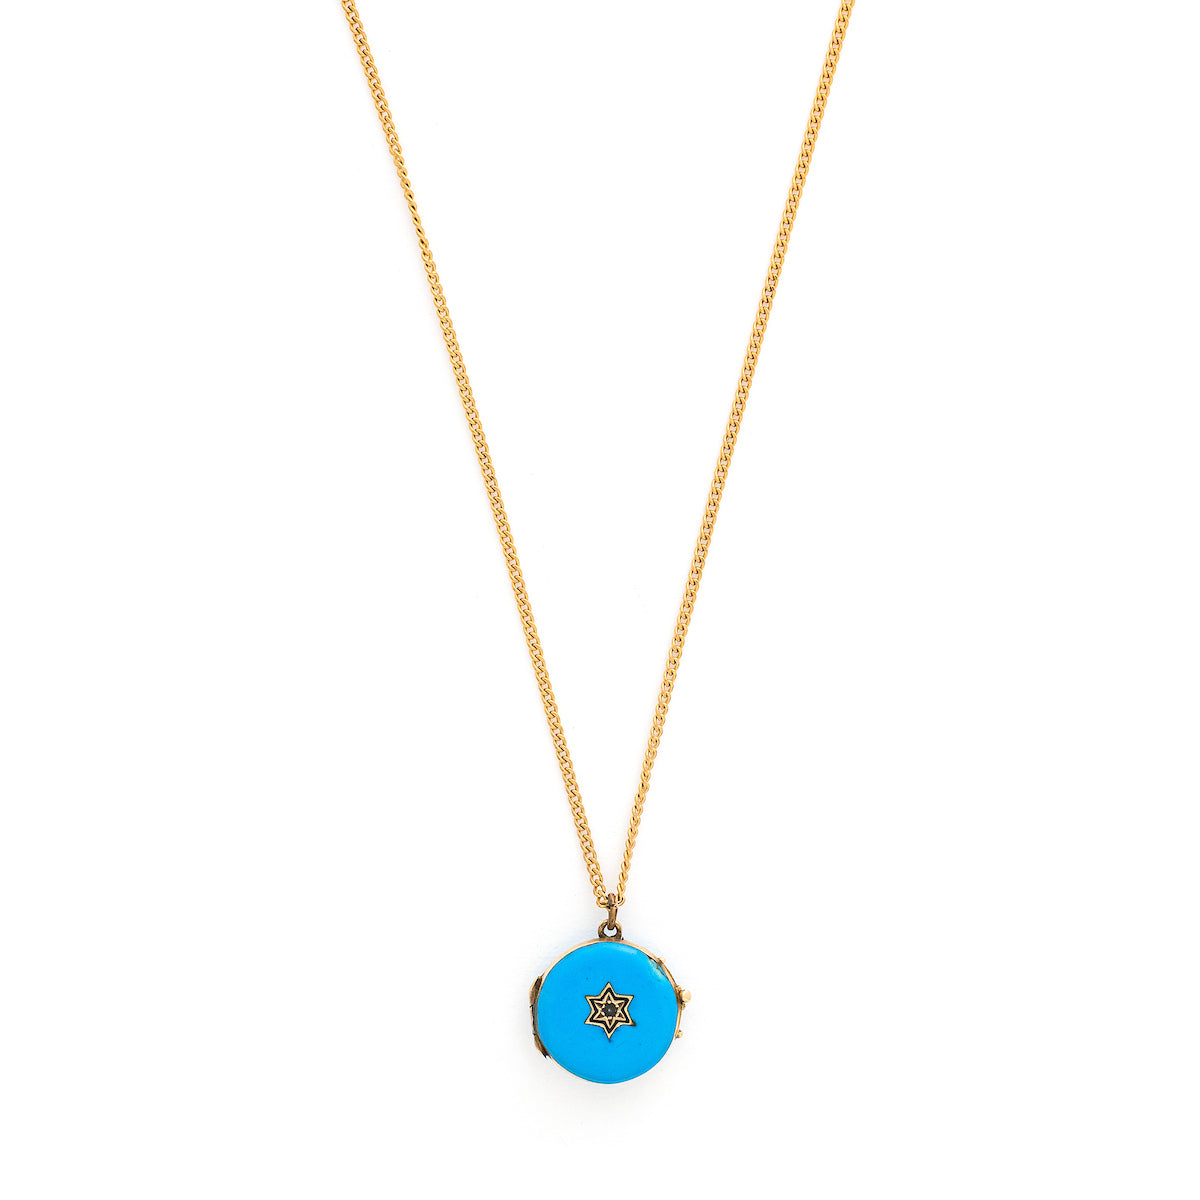 This petite round locket features striking cerulean blue enamel with a 14K gold Star of David at its center and a matching 14K gold border. It opens to hold two photos, includes one original glass and pairs perfectly with one of our antique gold chains. Front locket view